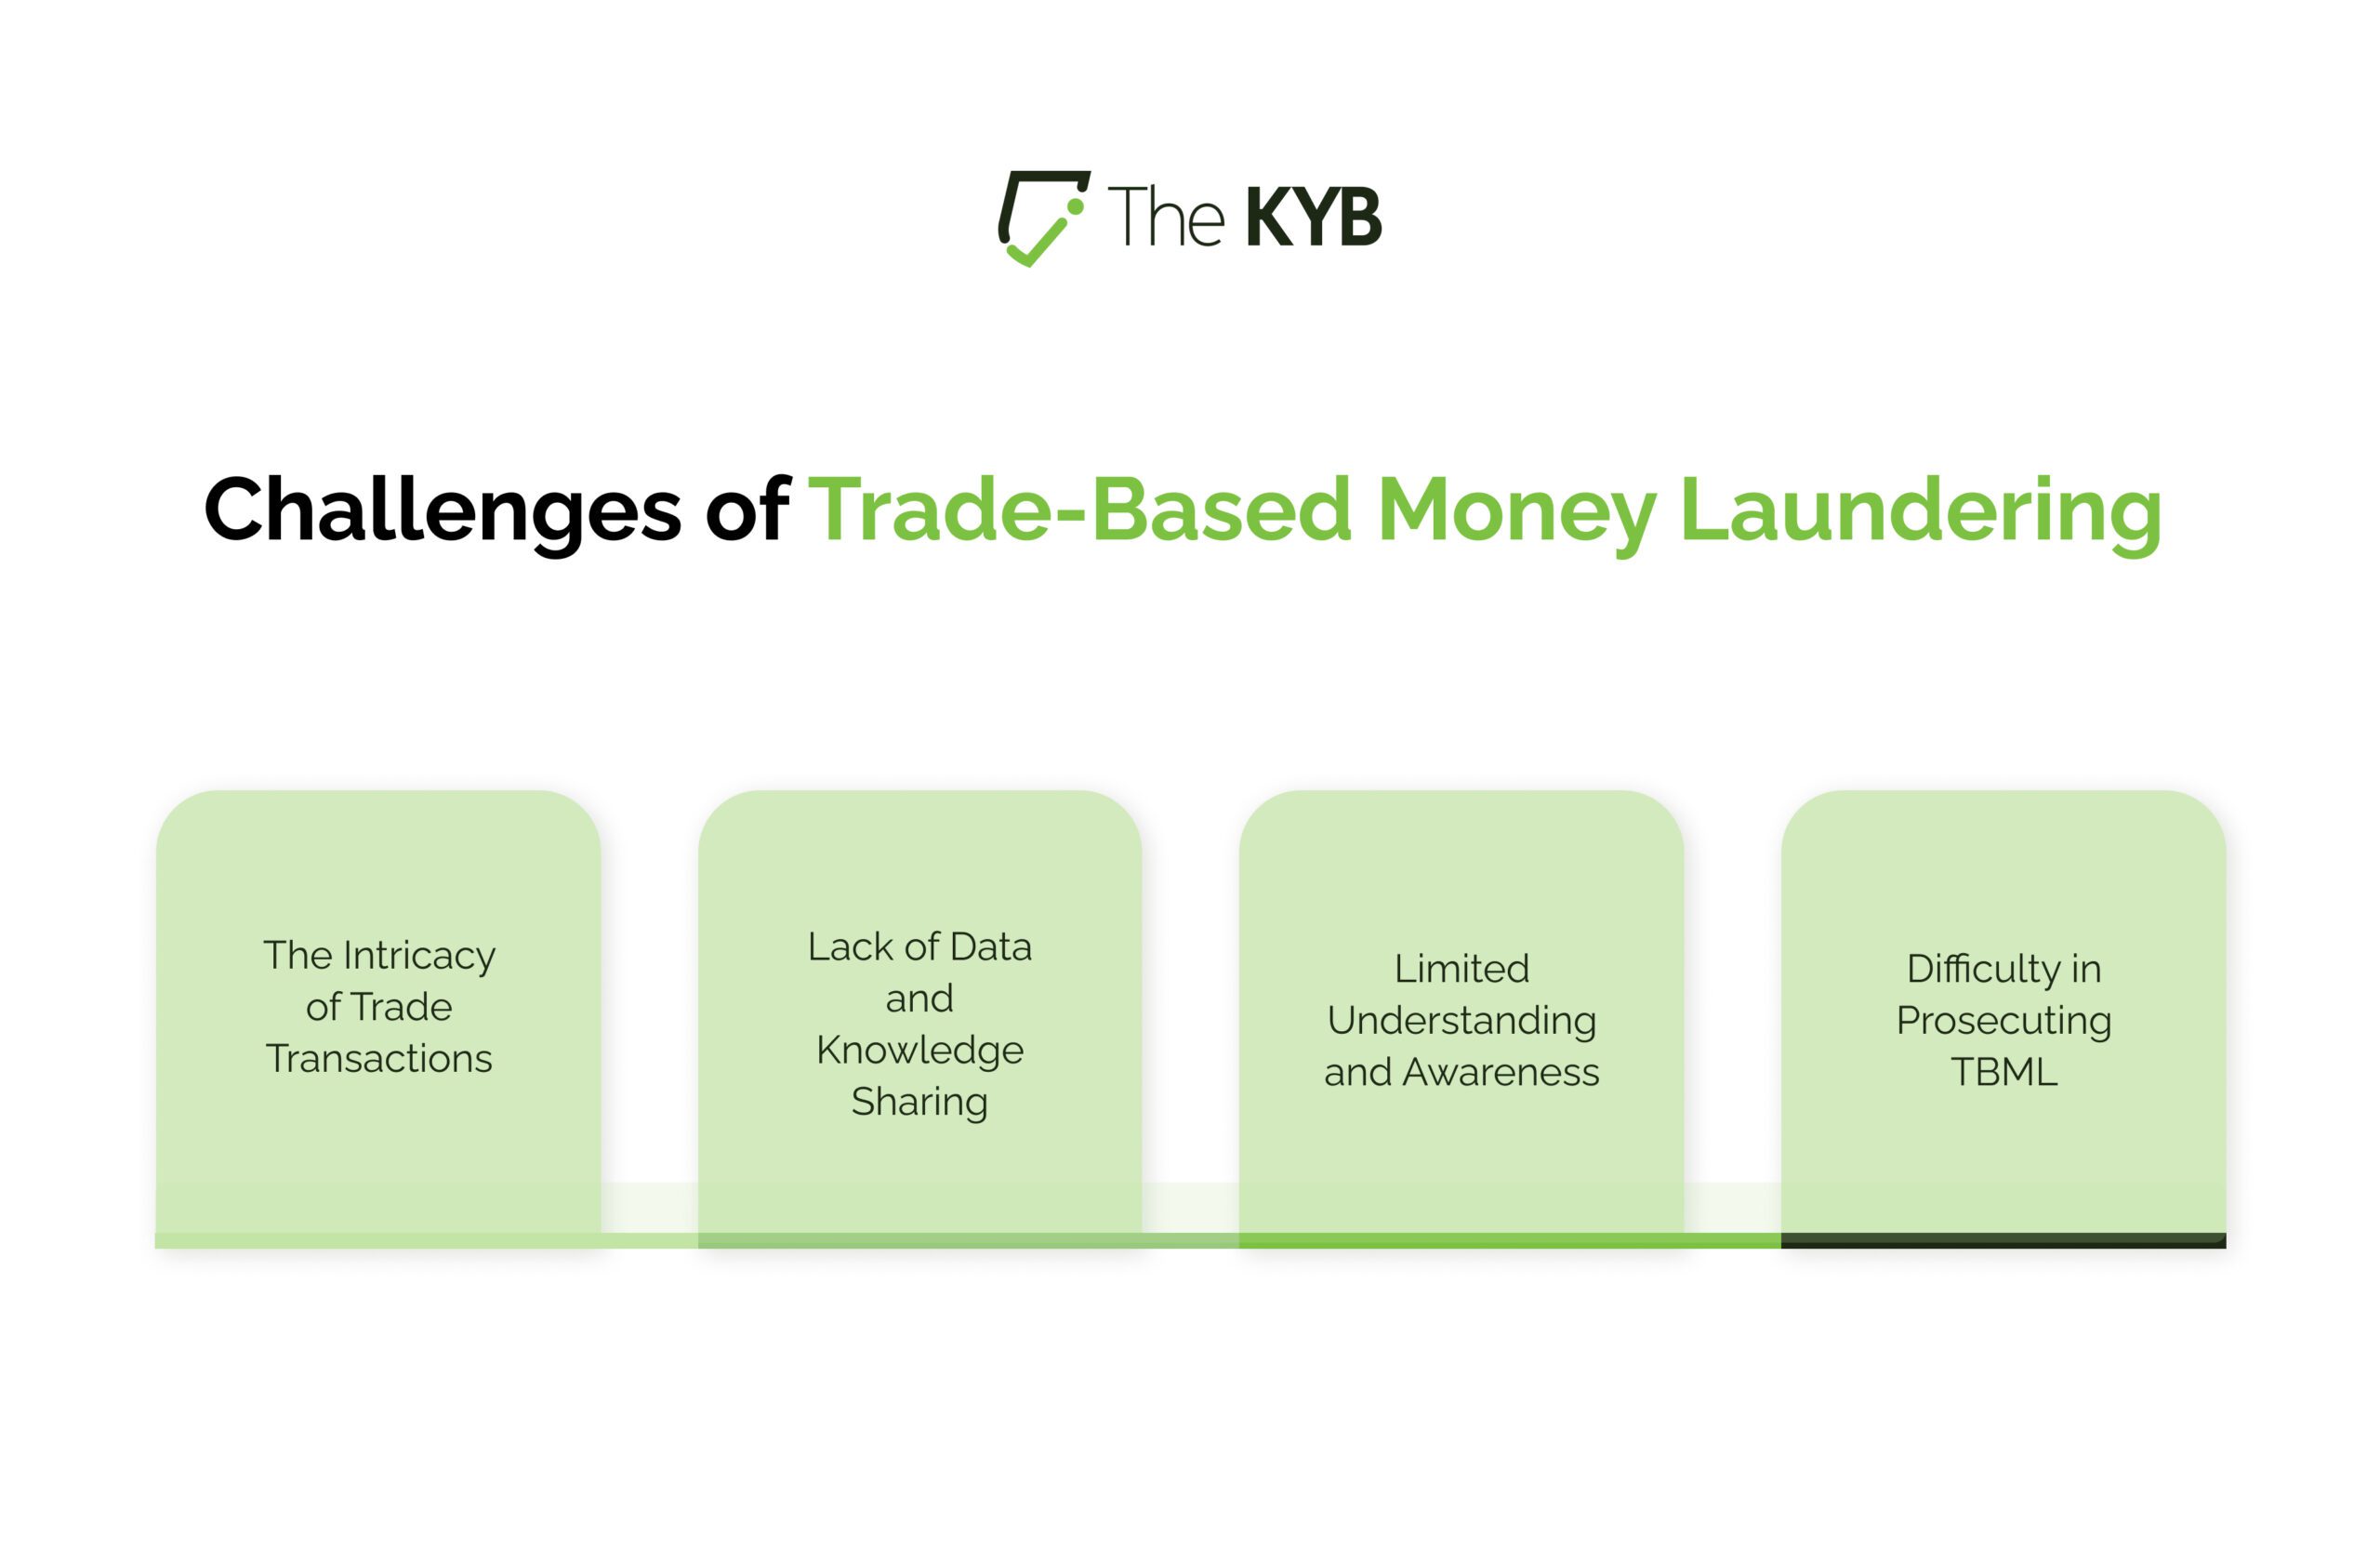 Challenges of Trade-Based Money Laundering